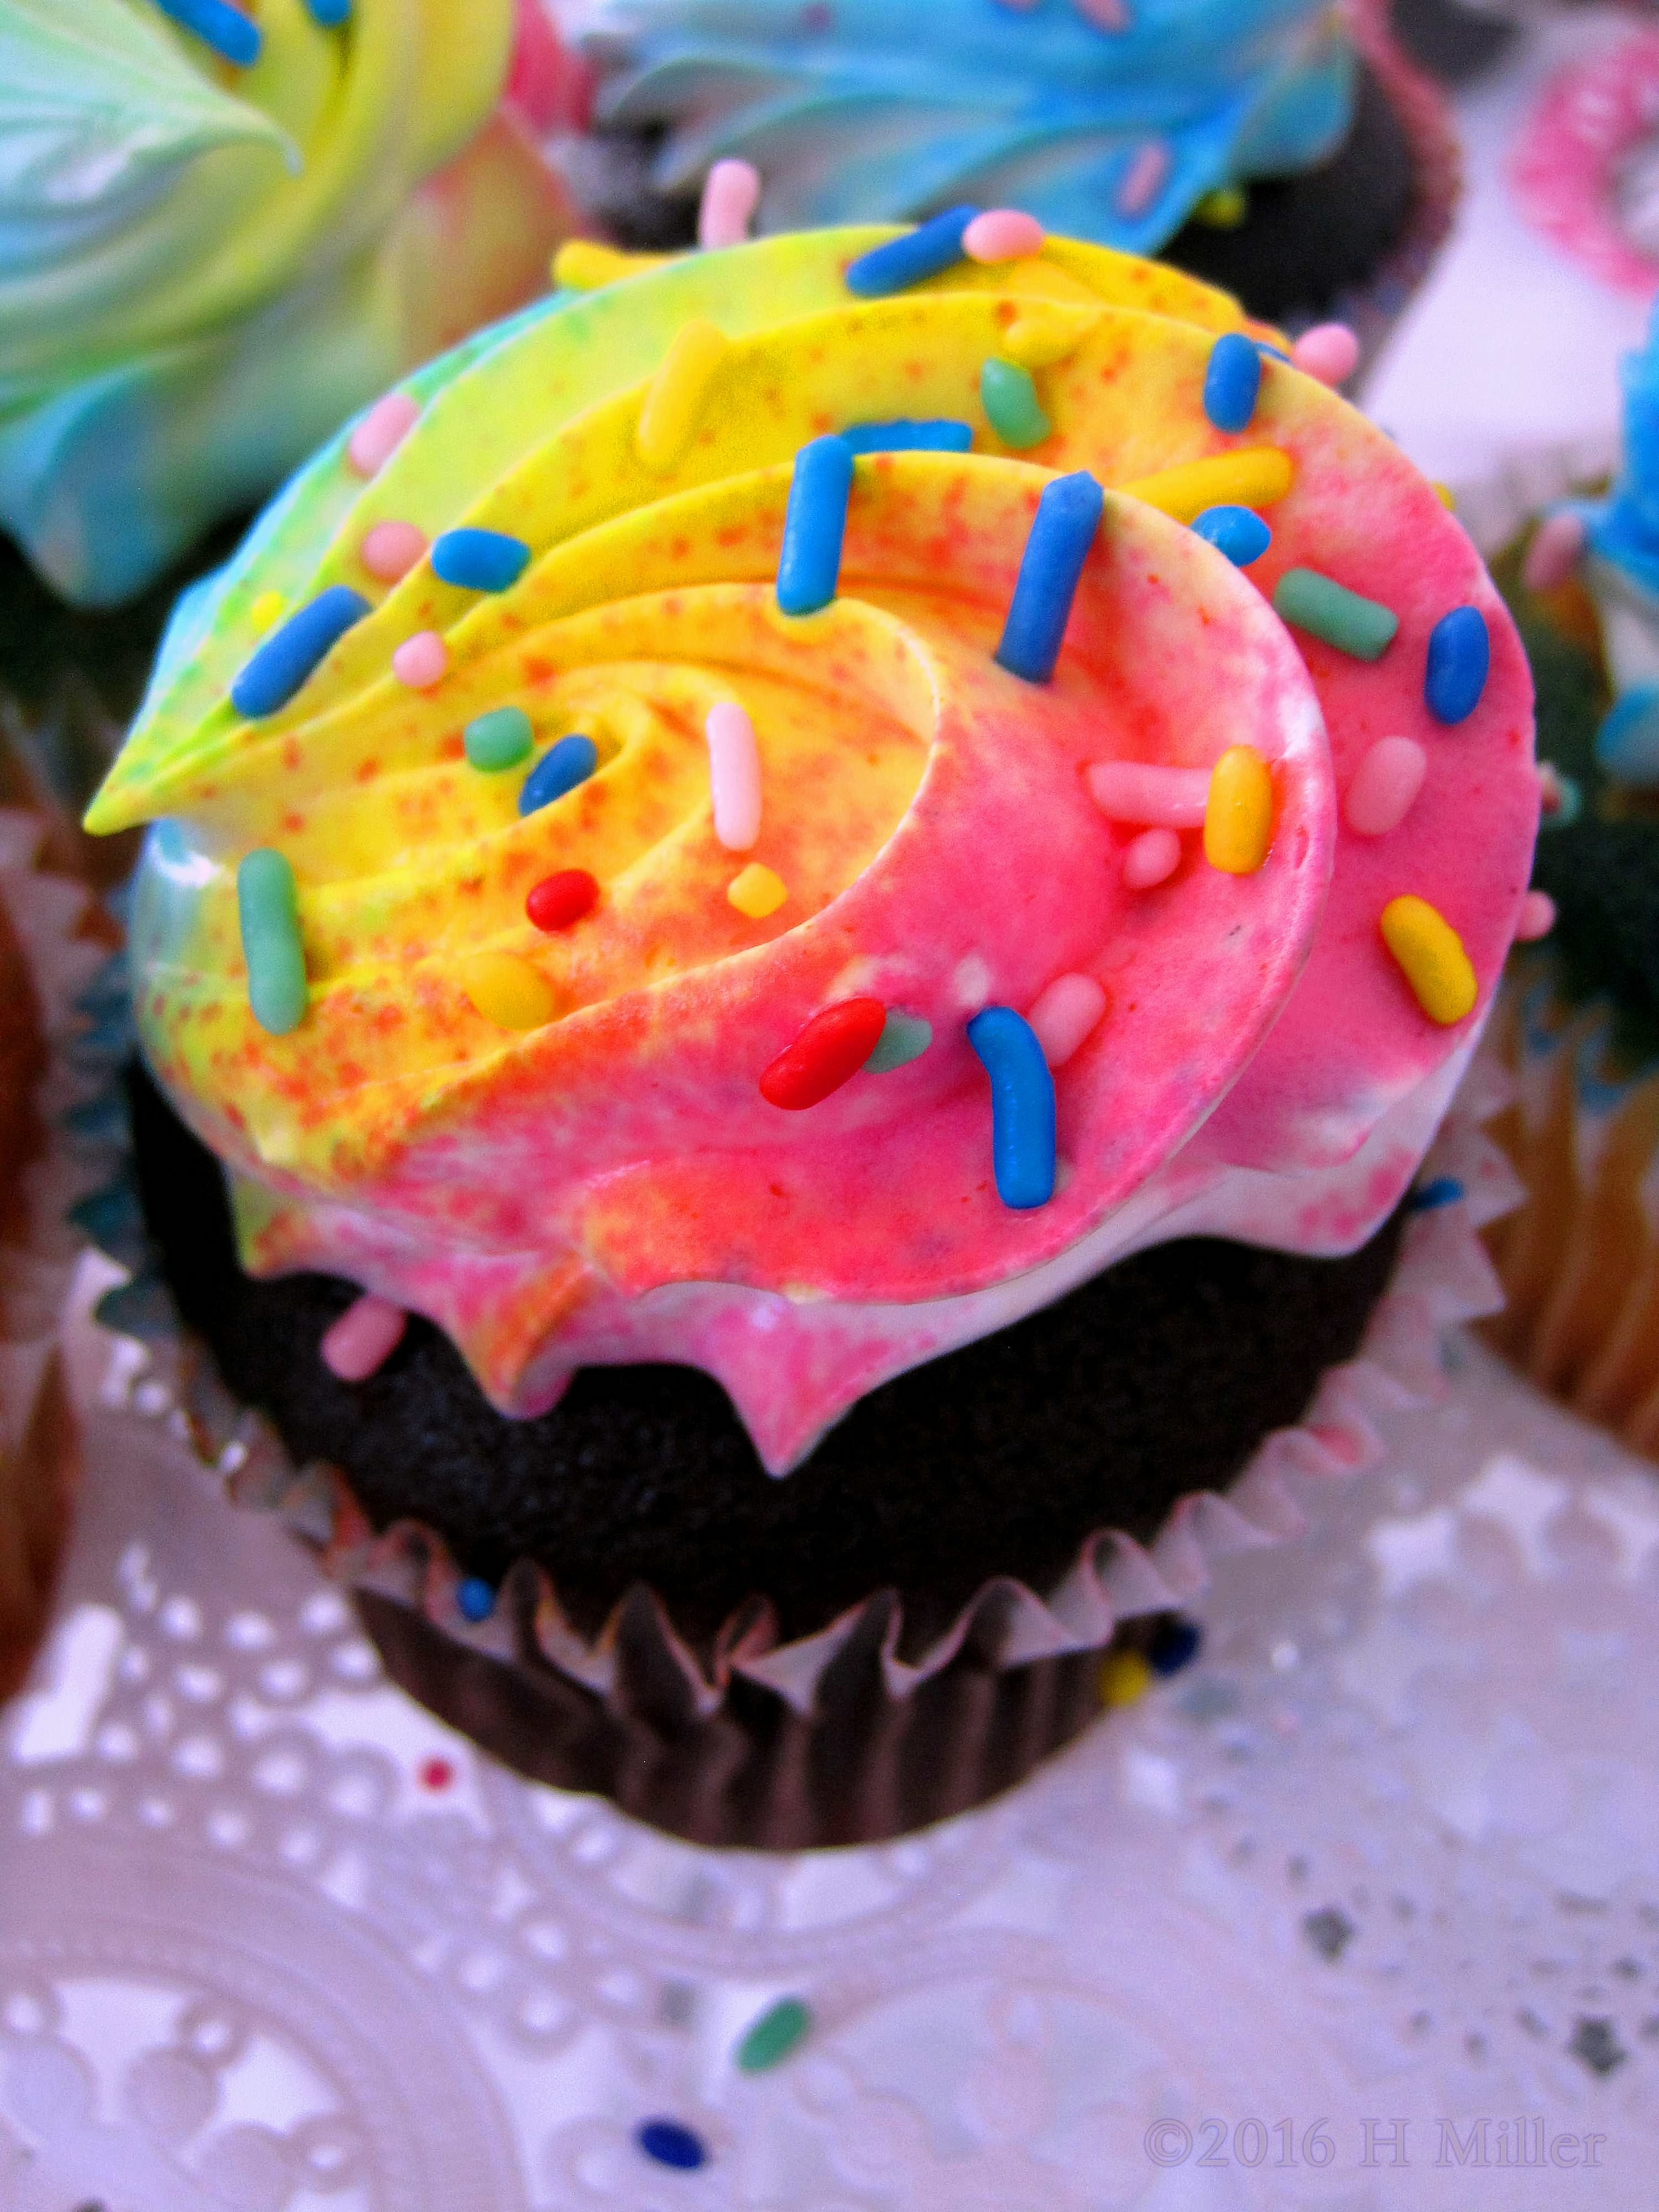 OMG! Just Look At Them! Aren't These Sweet Birthday Cupcakes The Prettiest! 